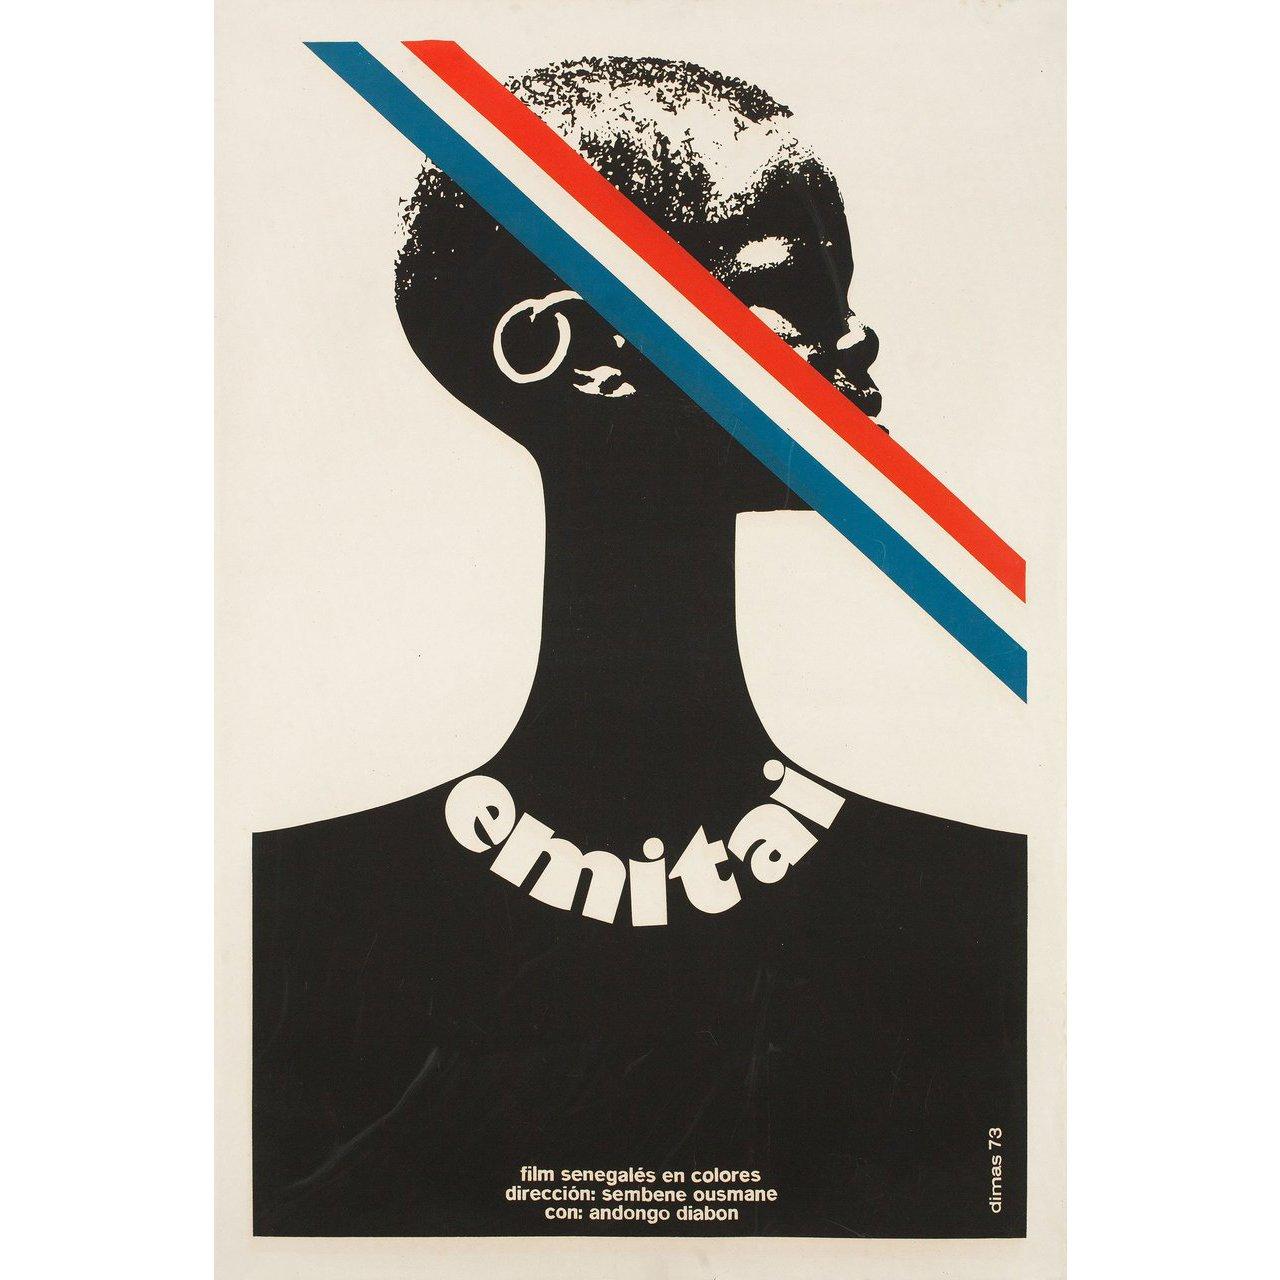 Original 1971 Cuban poster by Dimas for the film Emitai directed by Ousmane Sembene with Andongo Diabon / Robert Fontaine / Michel Renaudeau. Very Good-Fine condition, rolled. Please note: the size is stated in inches and the actual size can vary by